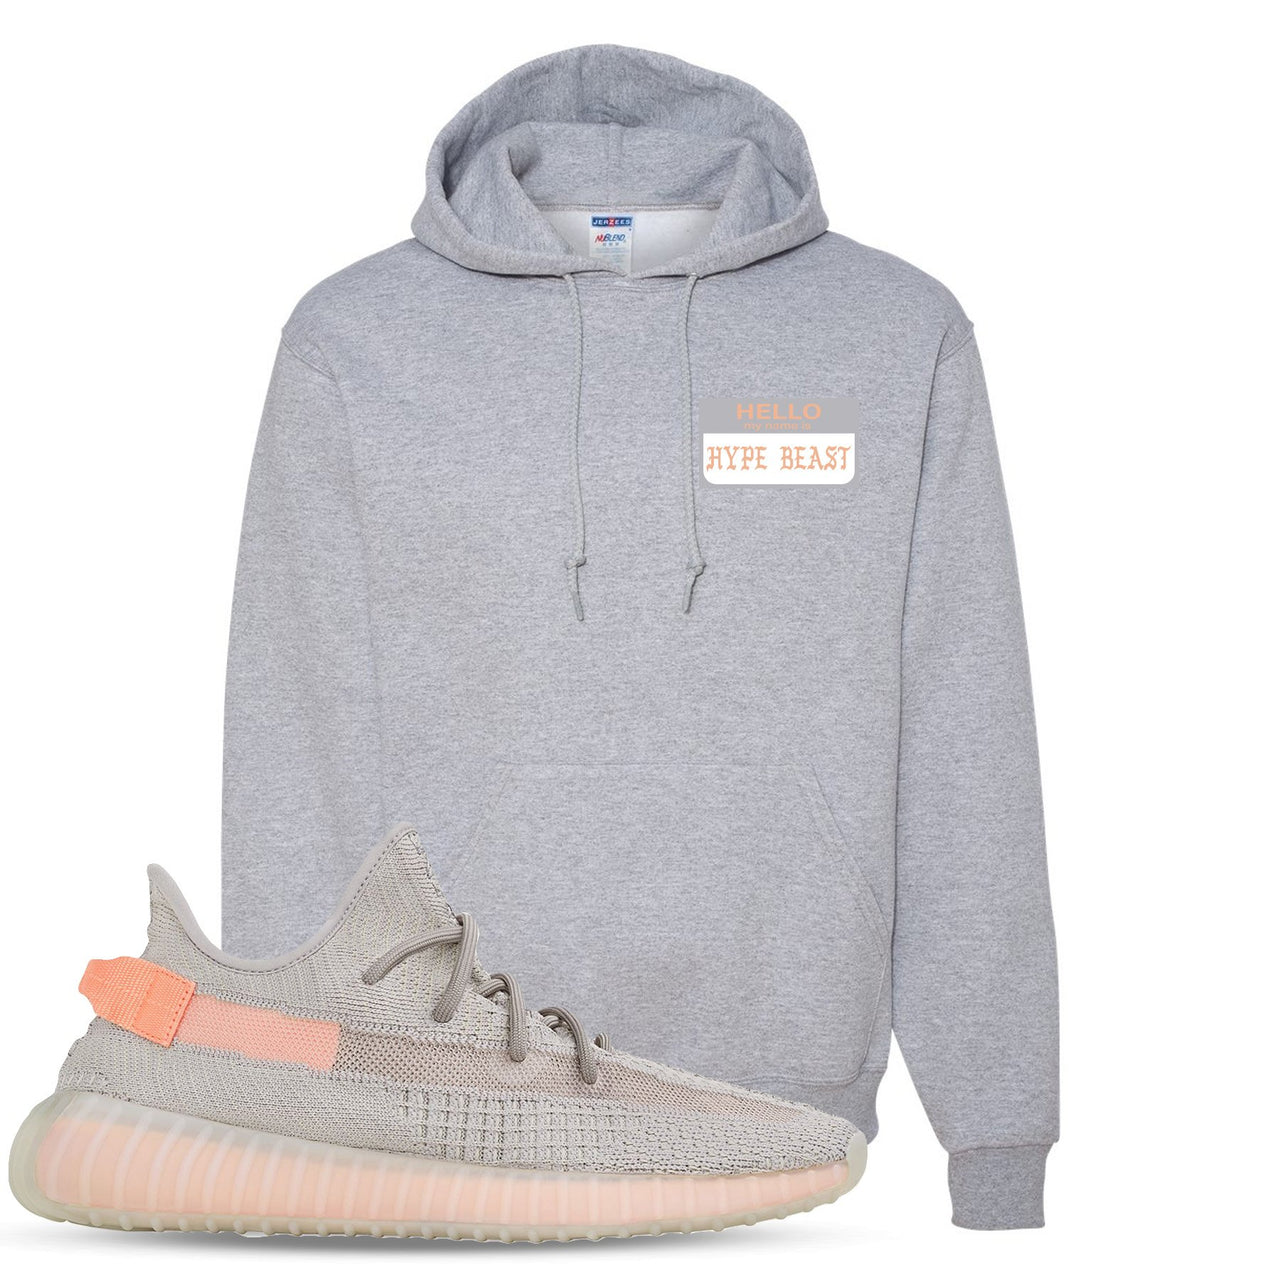 True Form v2 350s Hoodie | Hello My Name Is Hype Beast Pablo, Heathered Light Gray